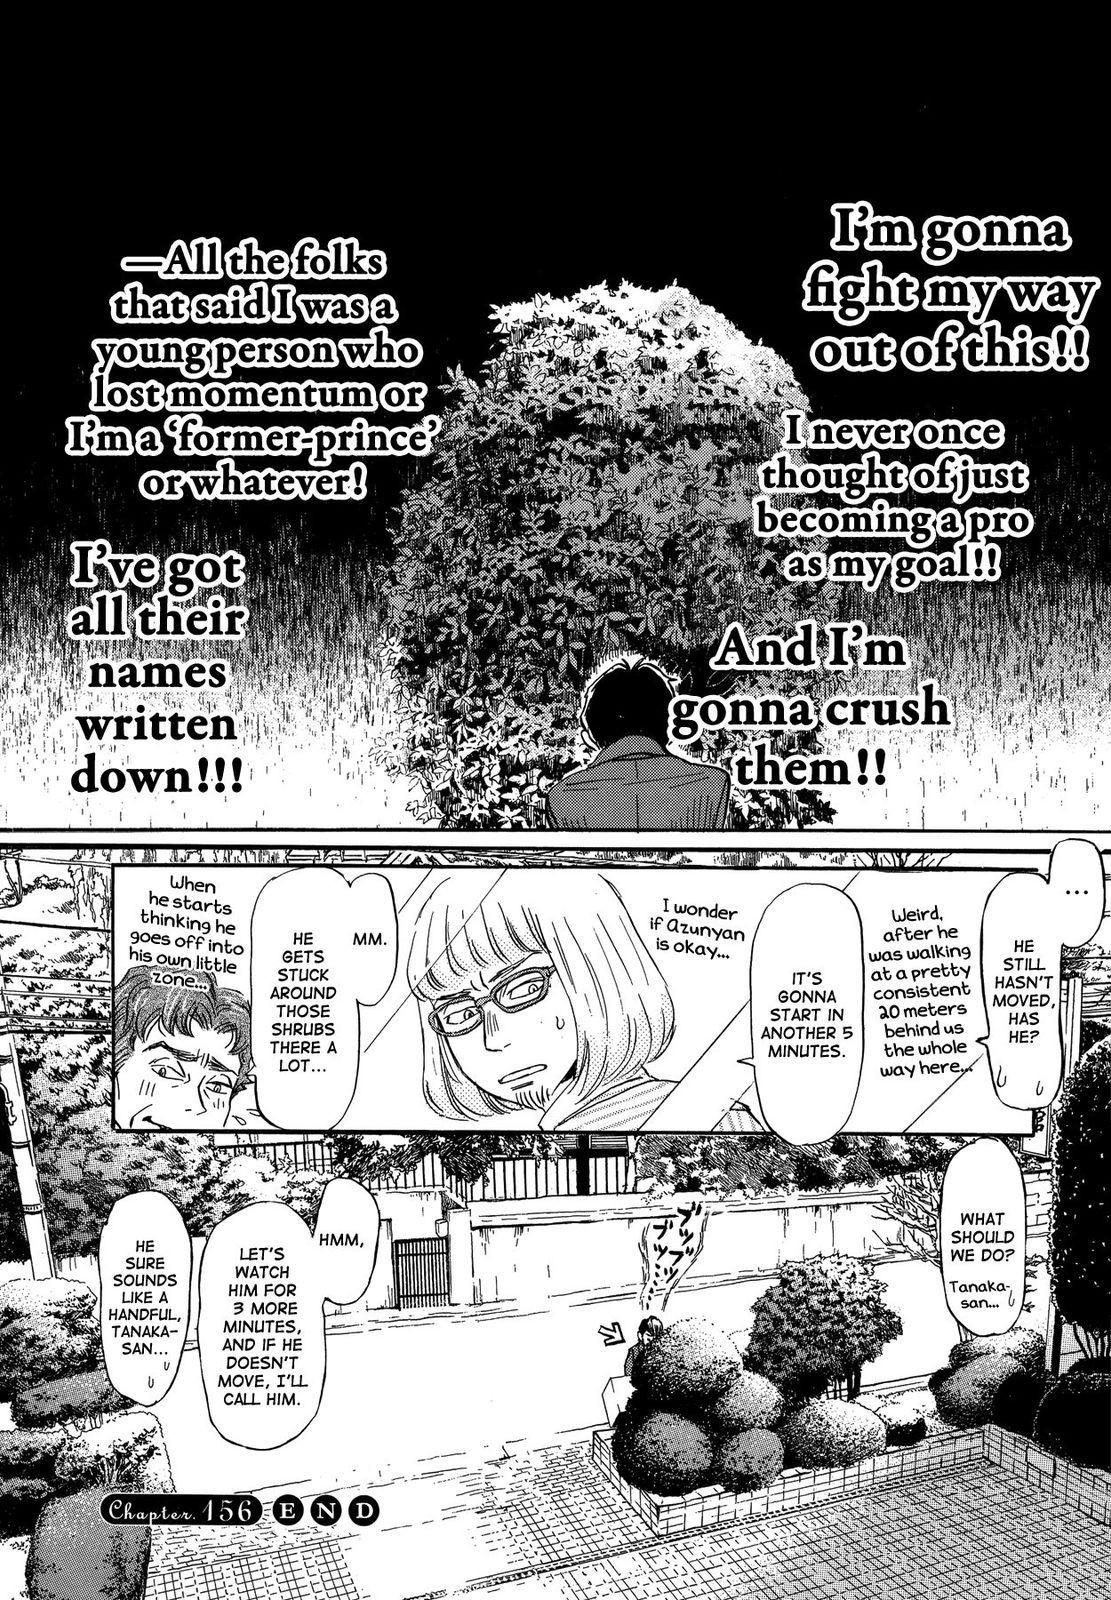 March Comes in Like a Lion, Chapter 156 Azusa Number 1 (Part 1) (EN) image 12